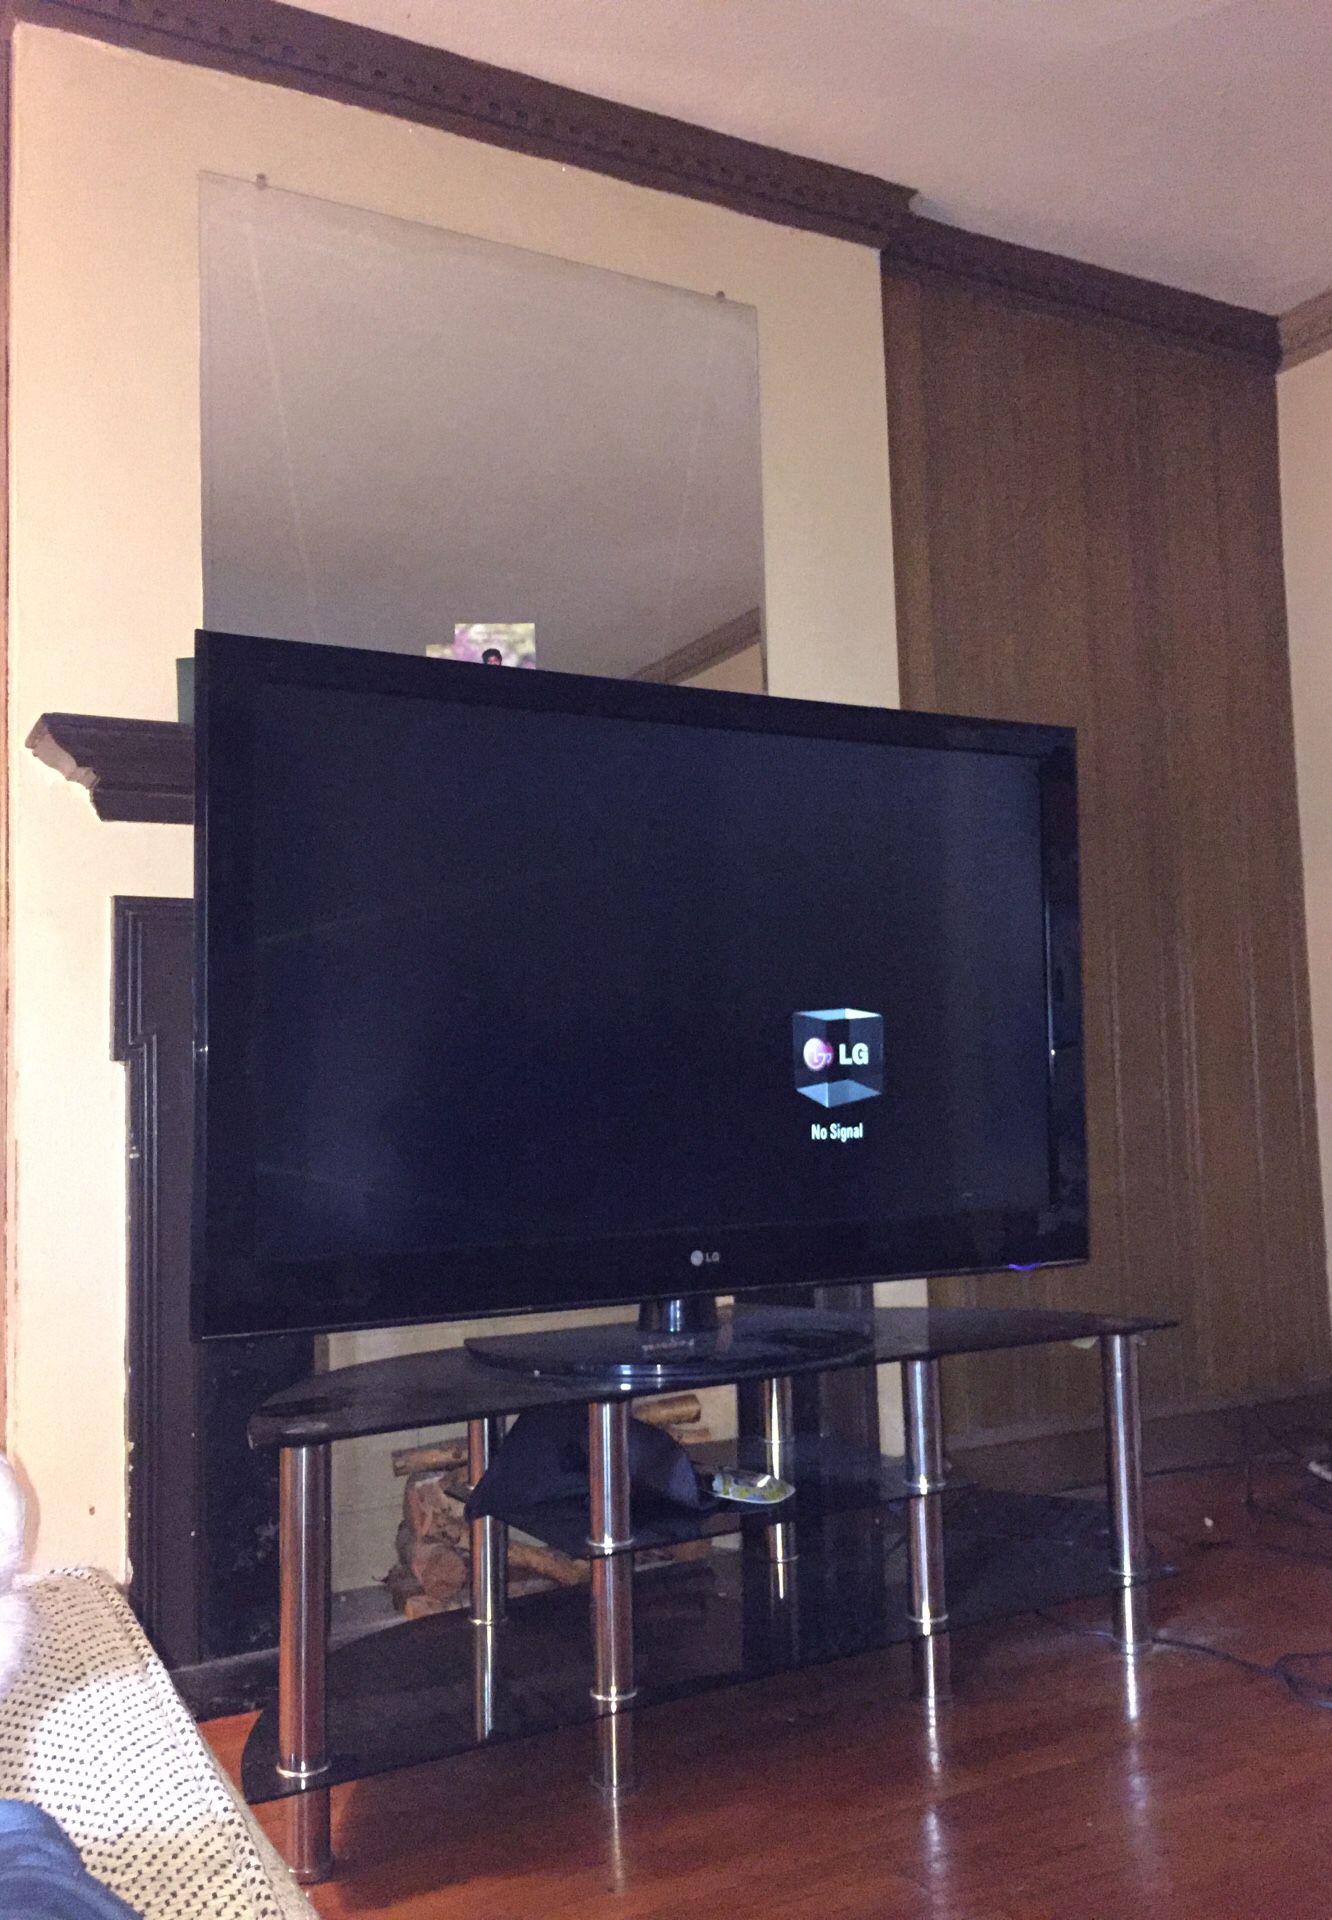 Lg tv 50 good condition plus I also have 55inch tcl roku smart tv